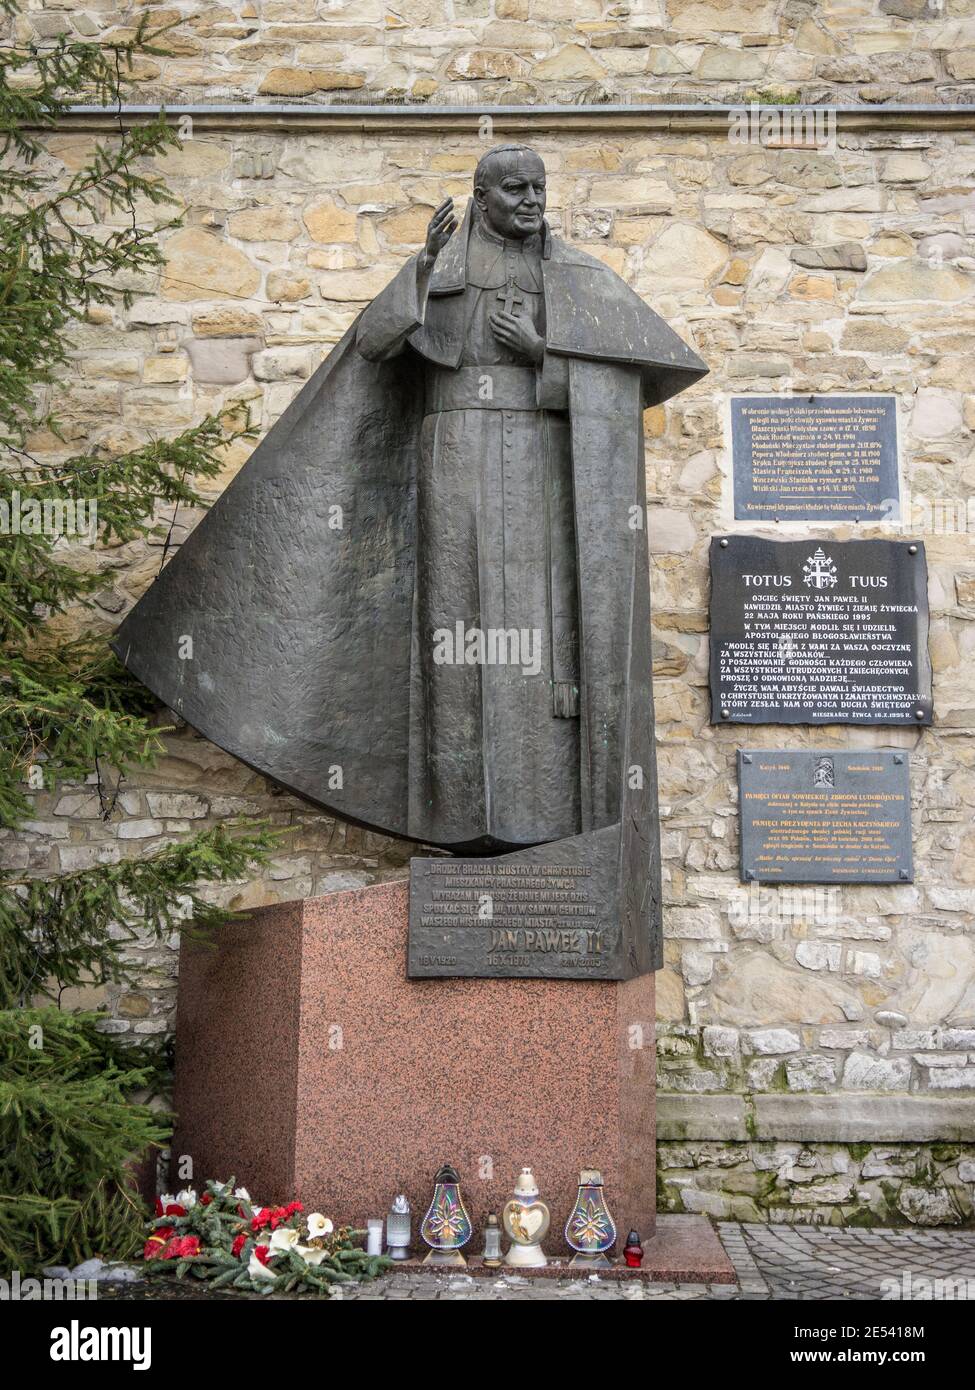 ZYWIEC, POLAND - Jan 24, 2021: John Paul II Monument at the market square. Monument was unveiled on Sunday (May 22, 2011) in Zywiec. Stock Photo